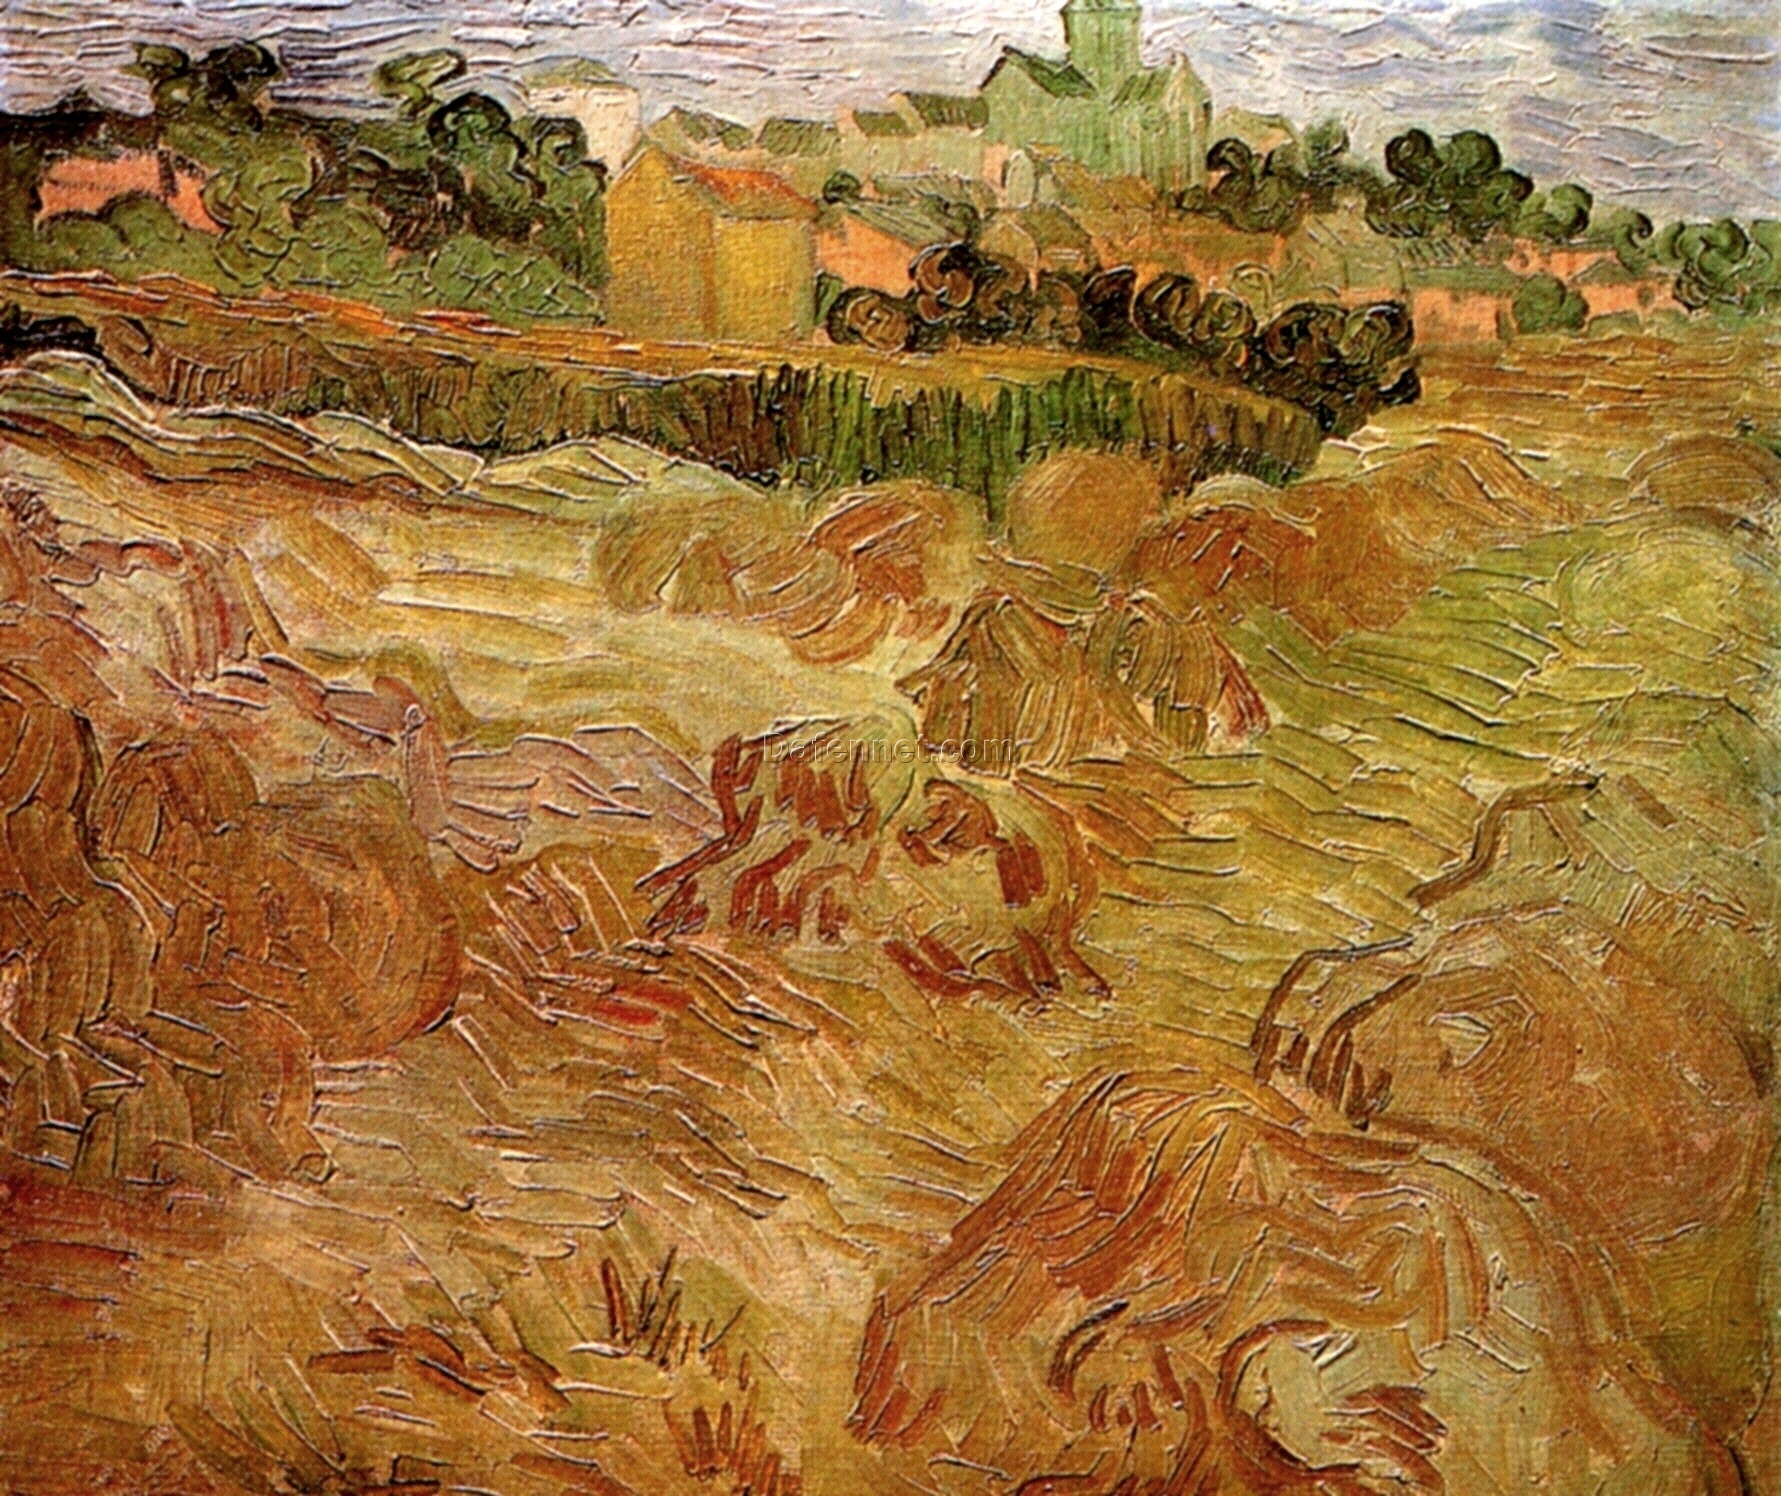 Wheat Fields with Auvers in the Background ,Vincent van Gogh -Oil painting reproduction.